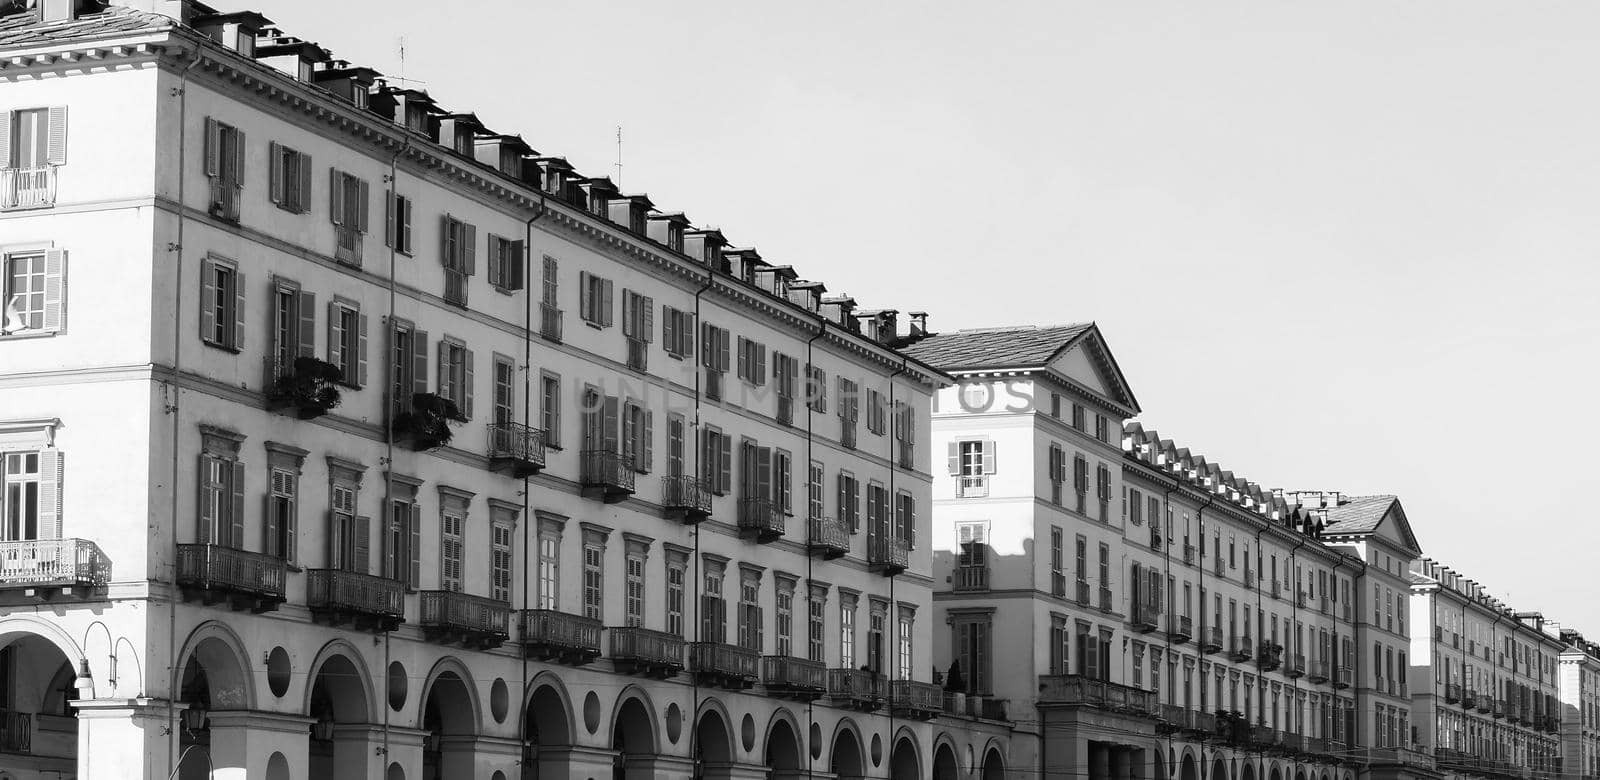 Piazza Vittorio Emanuele II square in Turin, Italy in black and white